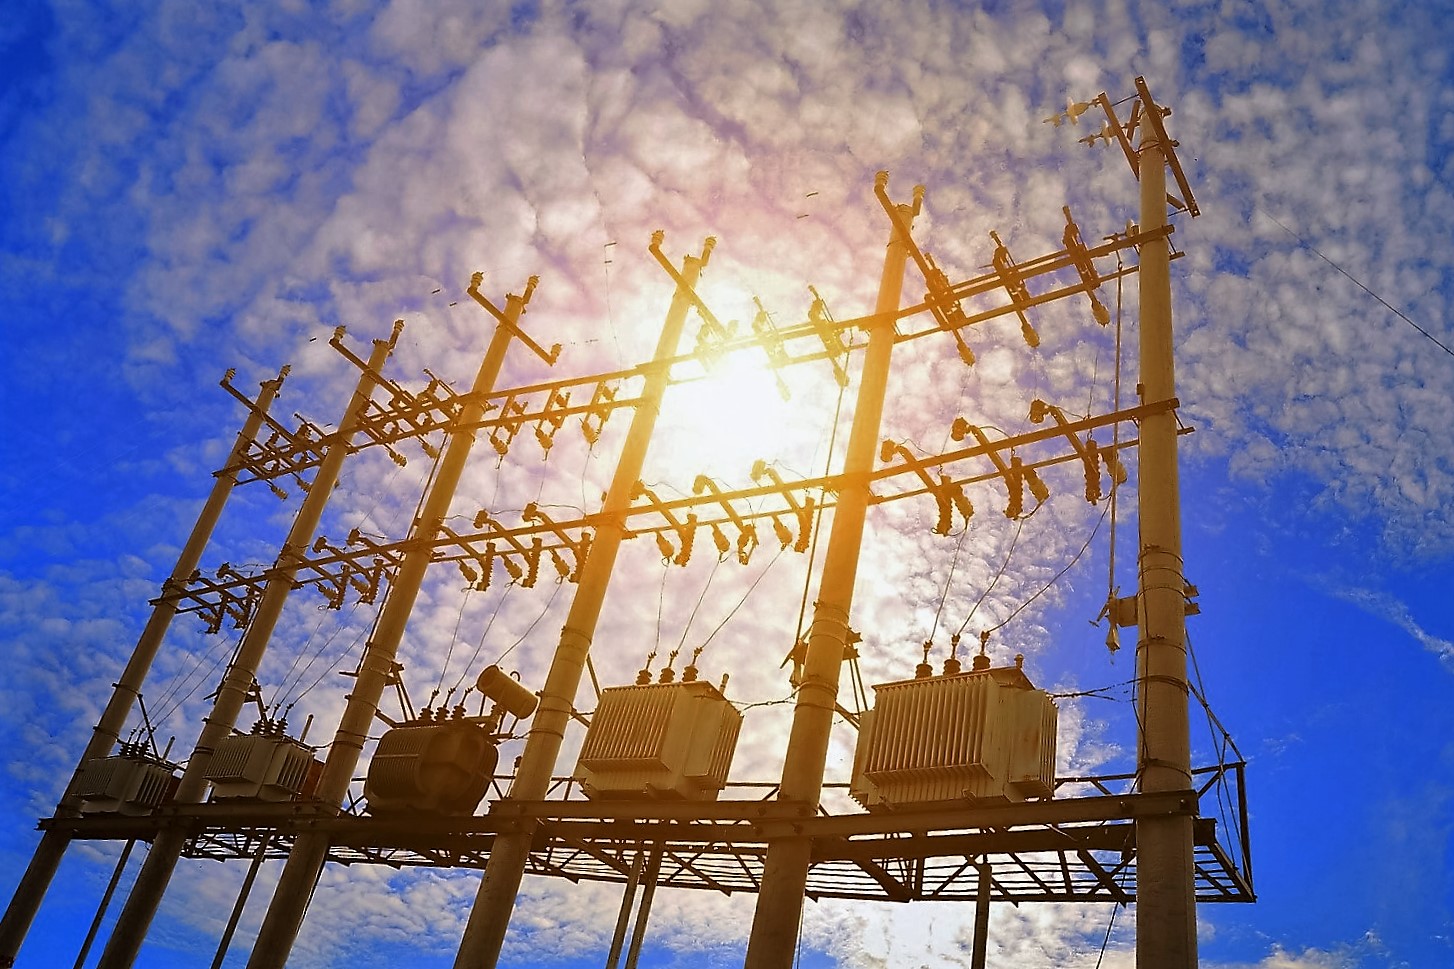 backlighting of a group of power transformer